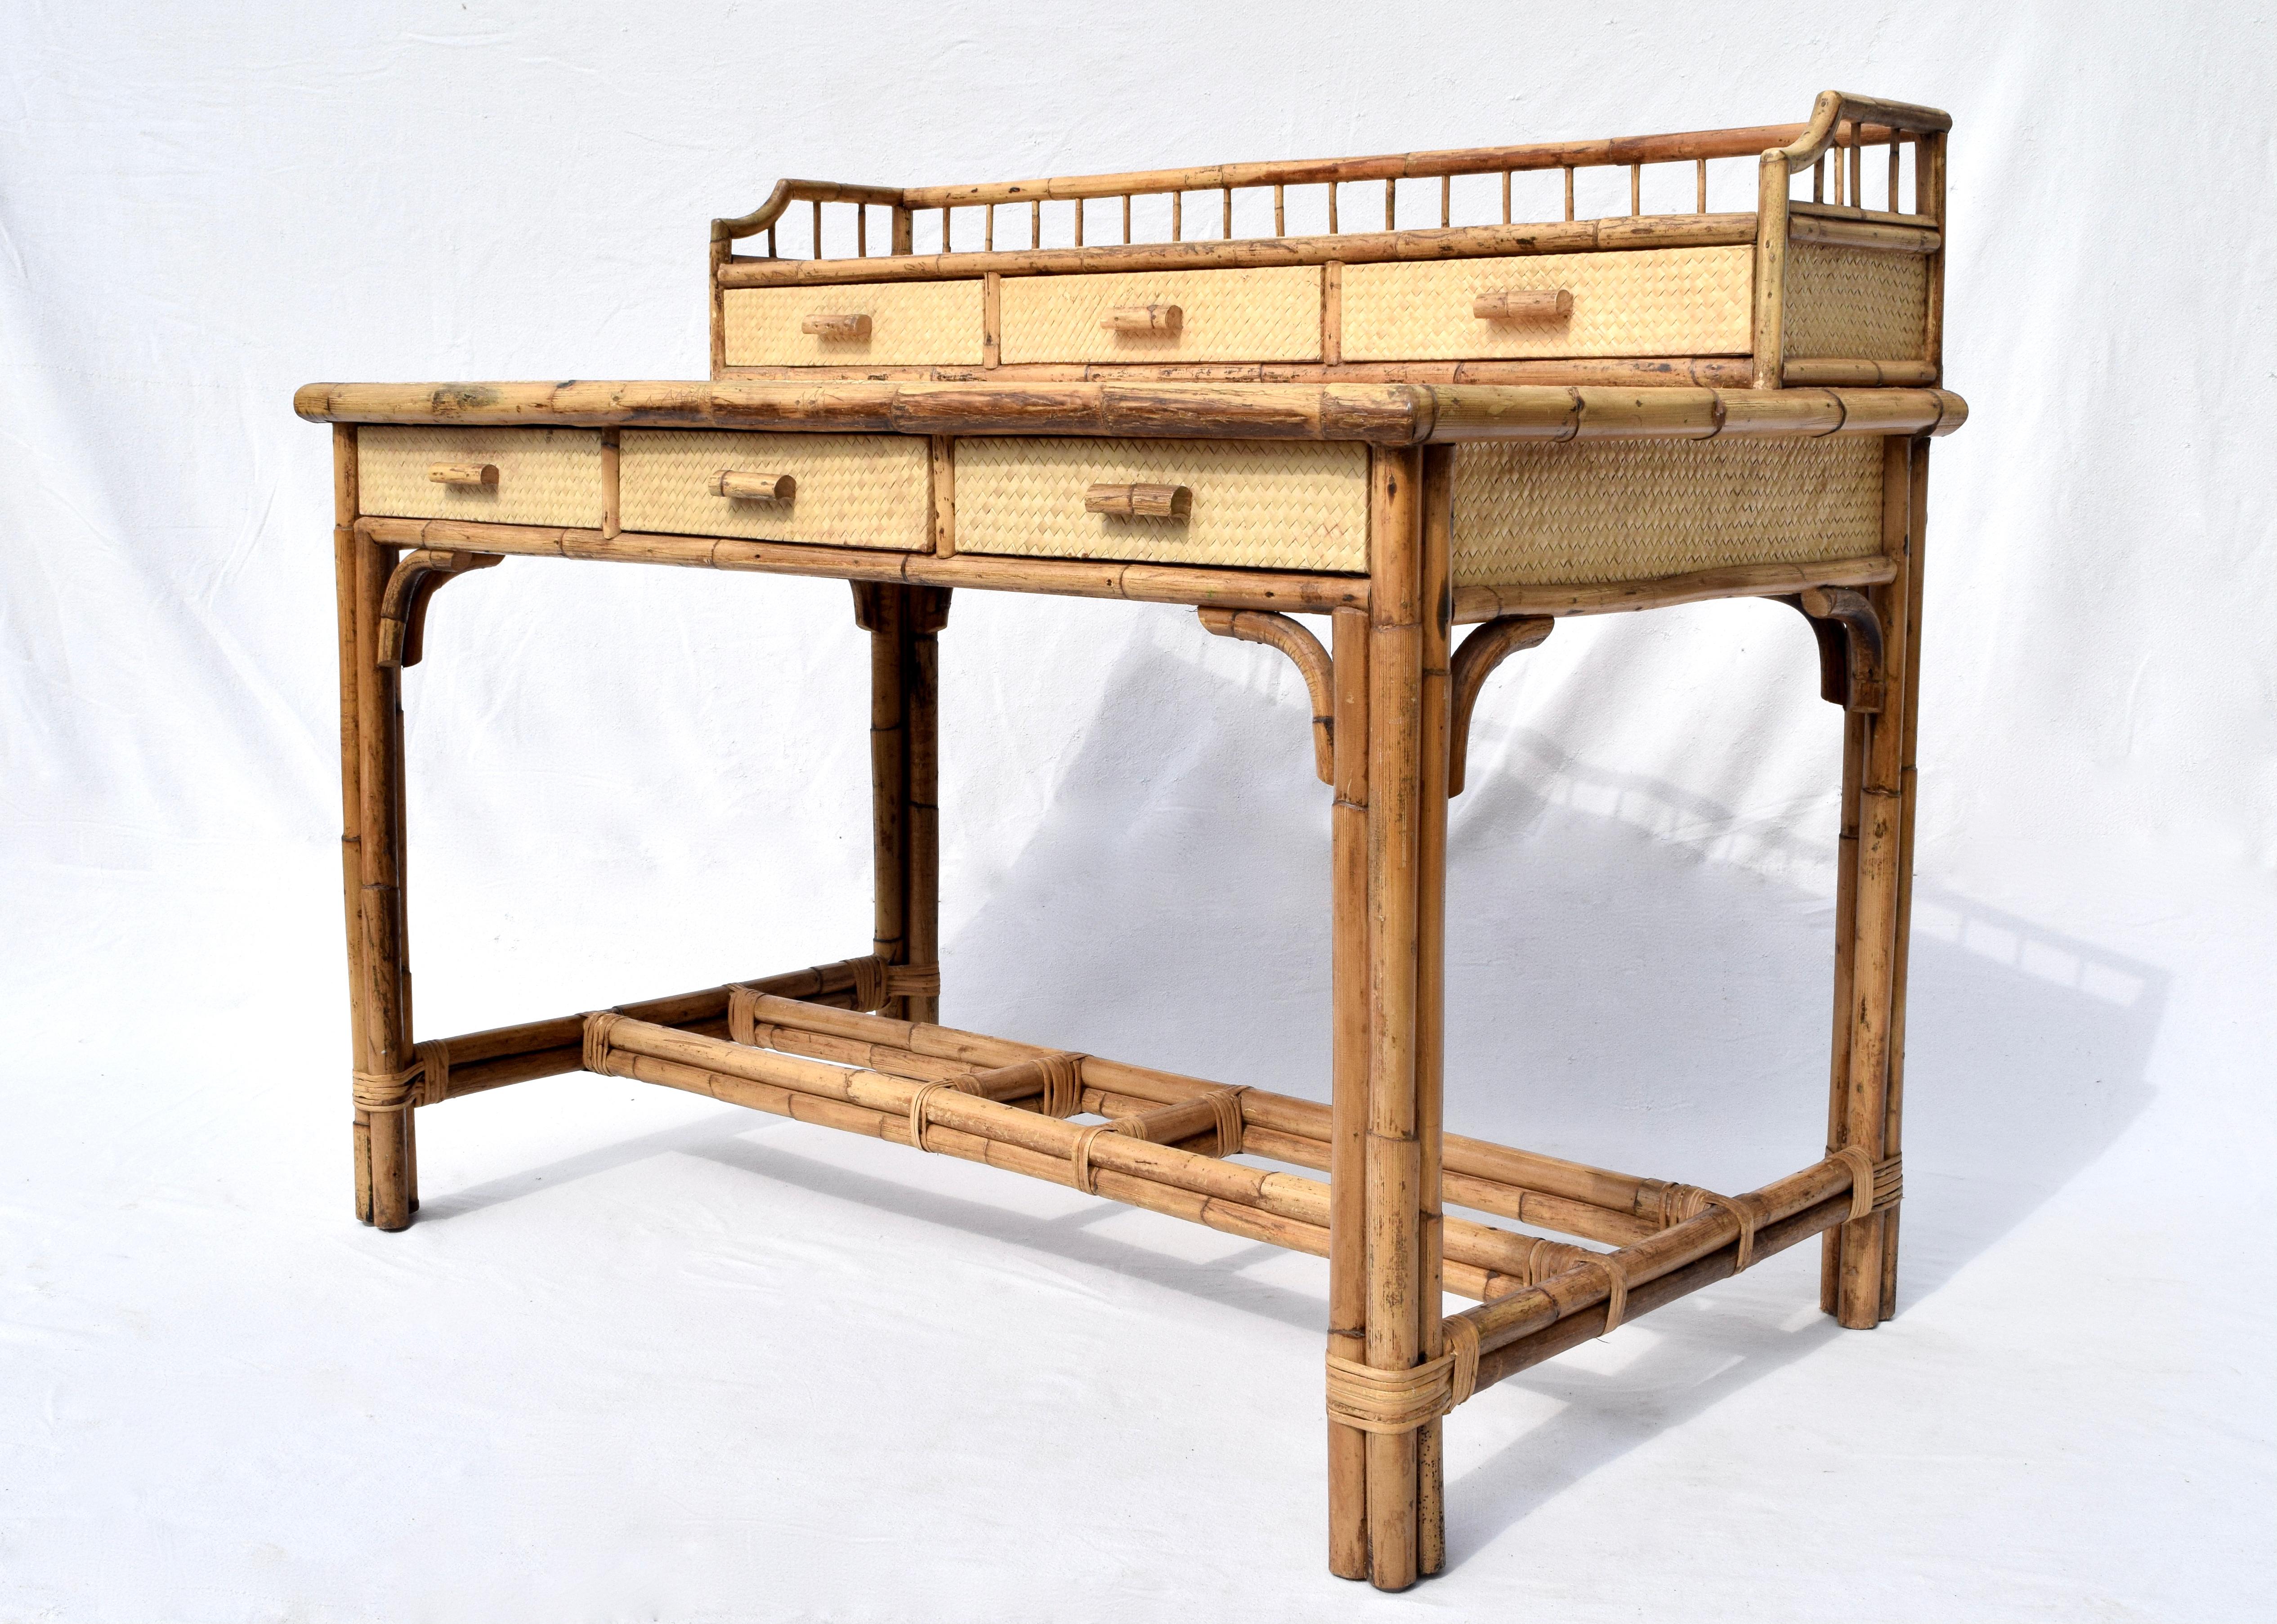 Midcentury British colonial 6-drawer writing desk with tiered gallery and two custom glass tops. Wrapped in grass cloth and framed in bamboo, this exceptionally preserved vintage desk features generous work surface & storage. Finished on all sides